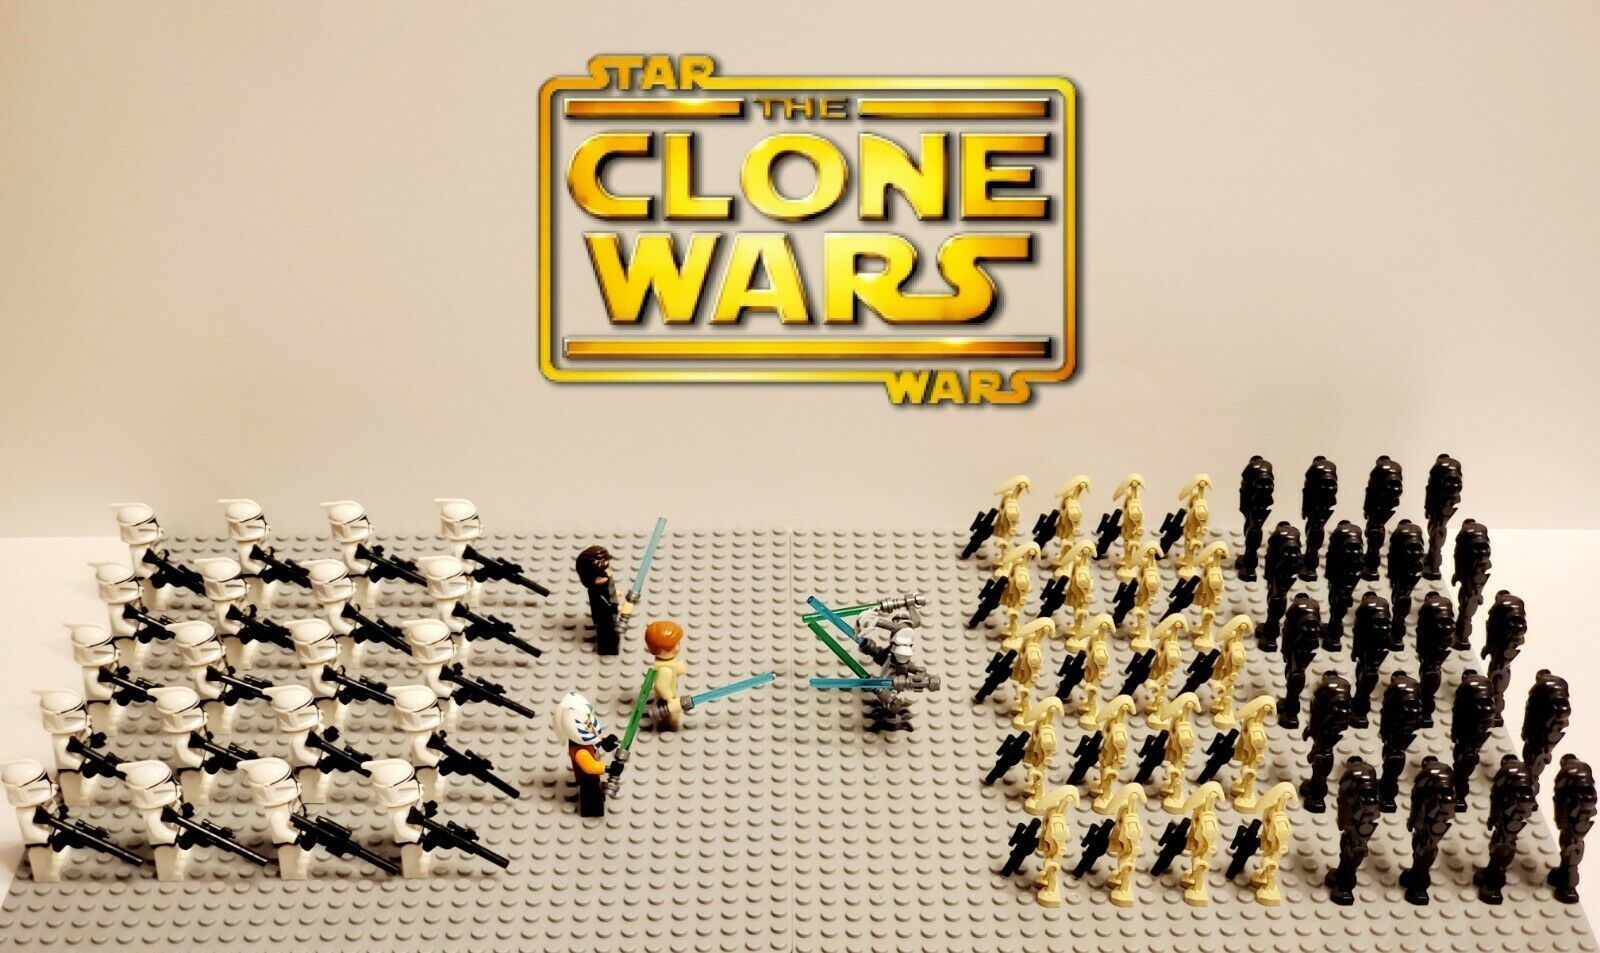 64Pcs Star Wars The Clone Wars Battle of Geonosis Minifigures Collection Toys